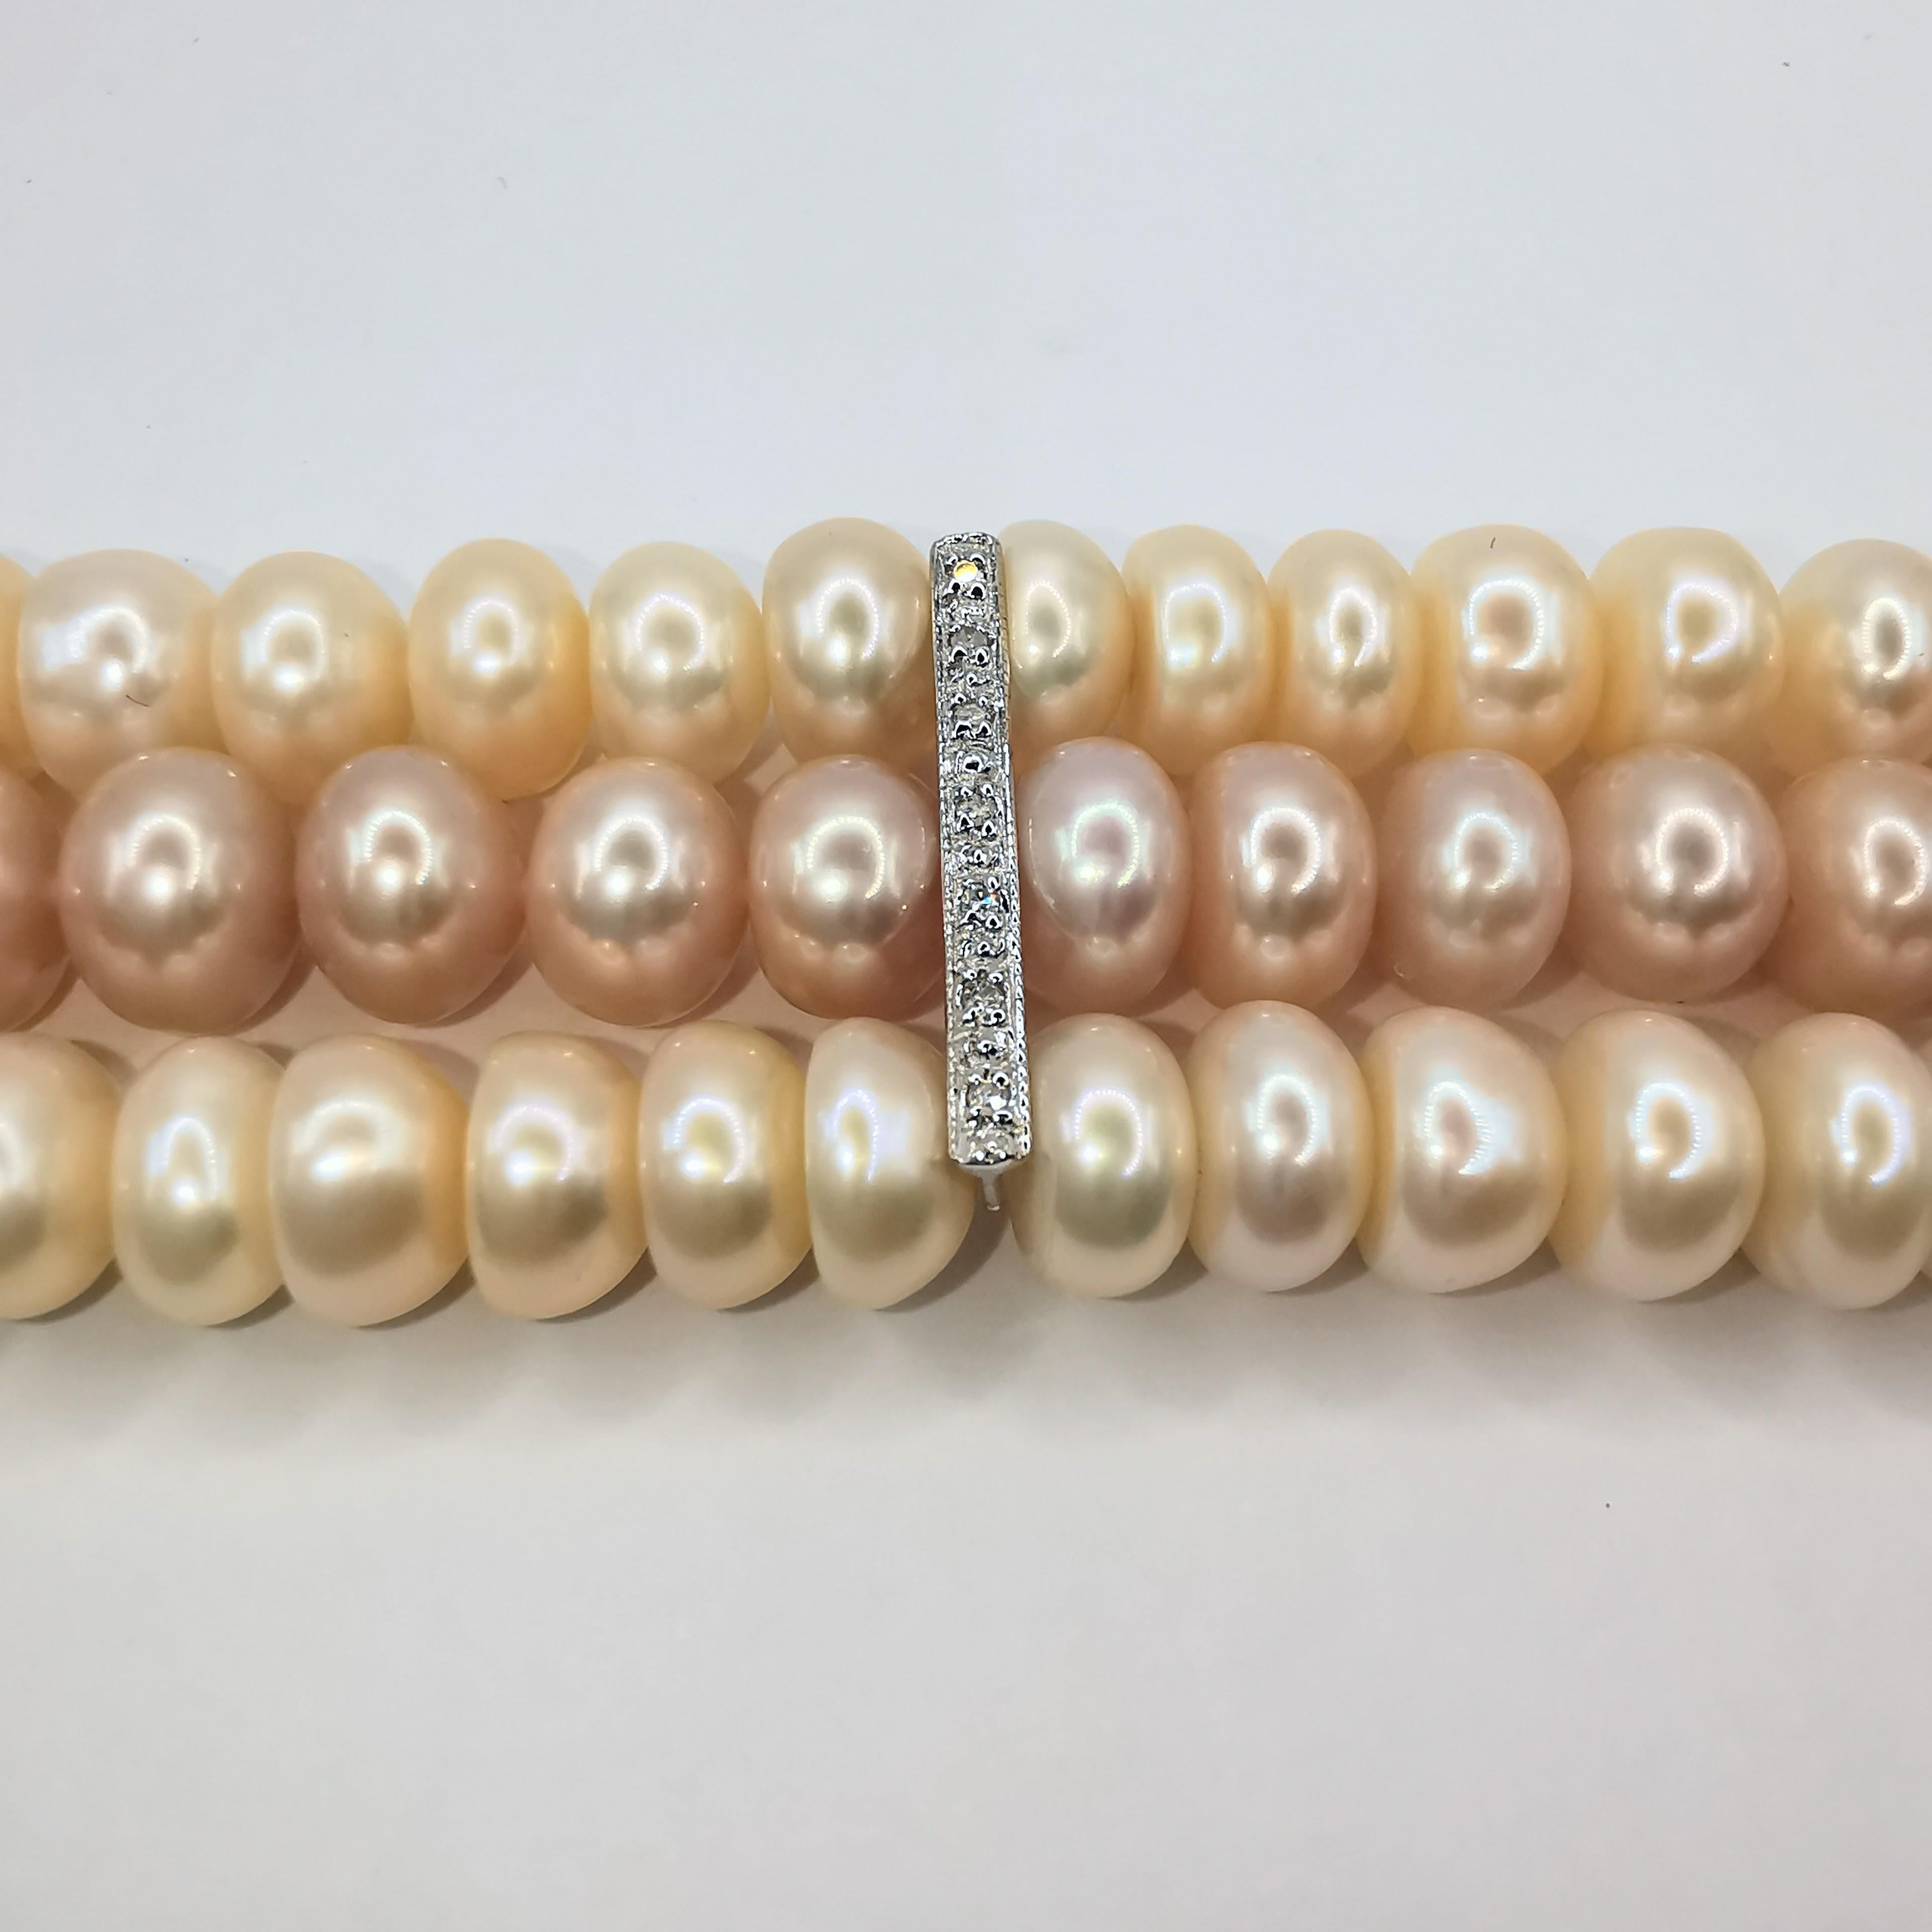 Contemporary Three-Strand White & Pink Pearl Bracelet with Diamond Clasp in 14K White Gold